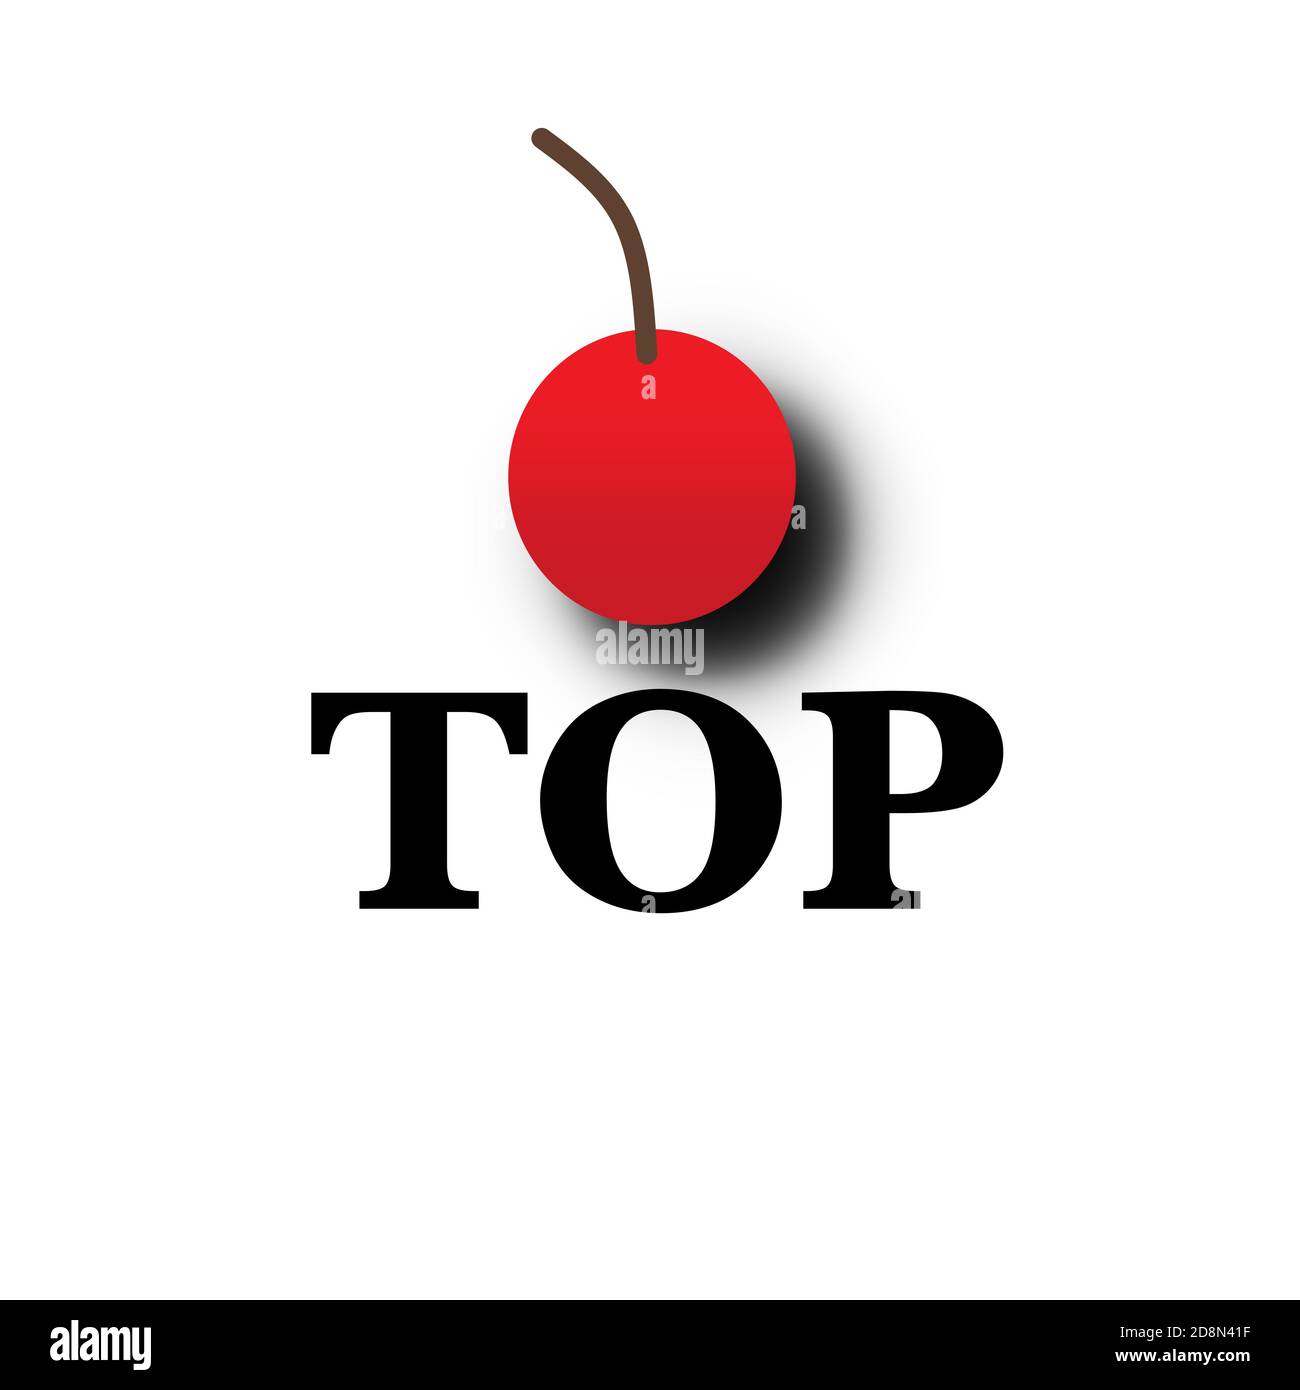 Illustration of the saying Cherry on Top Stock Photo